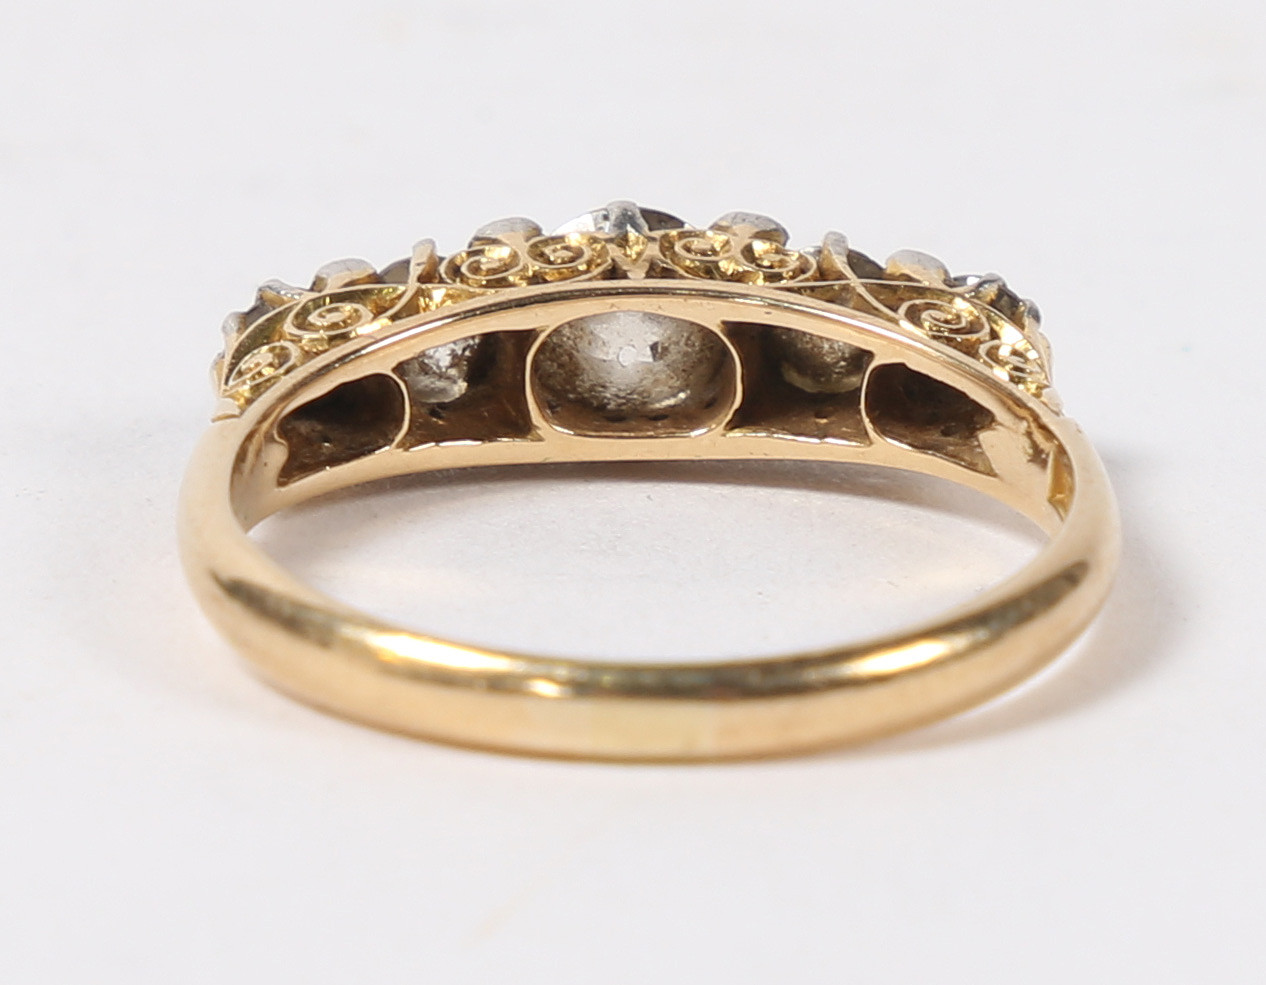 AN 18 CARAT GOLD AND DIAMOND RING. - Image 3 of 5